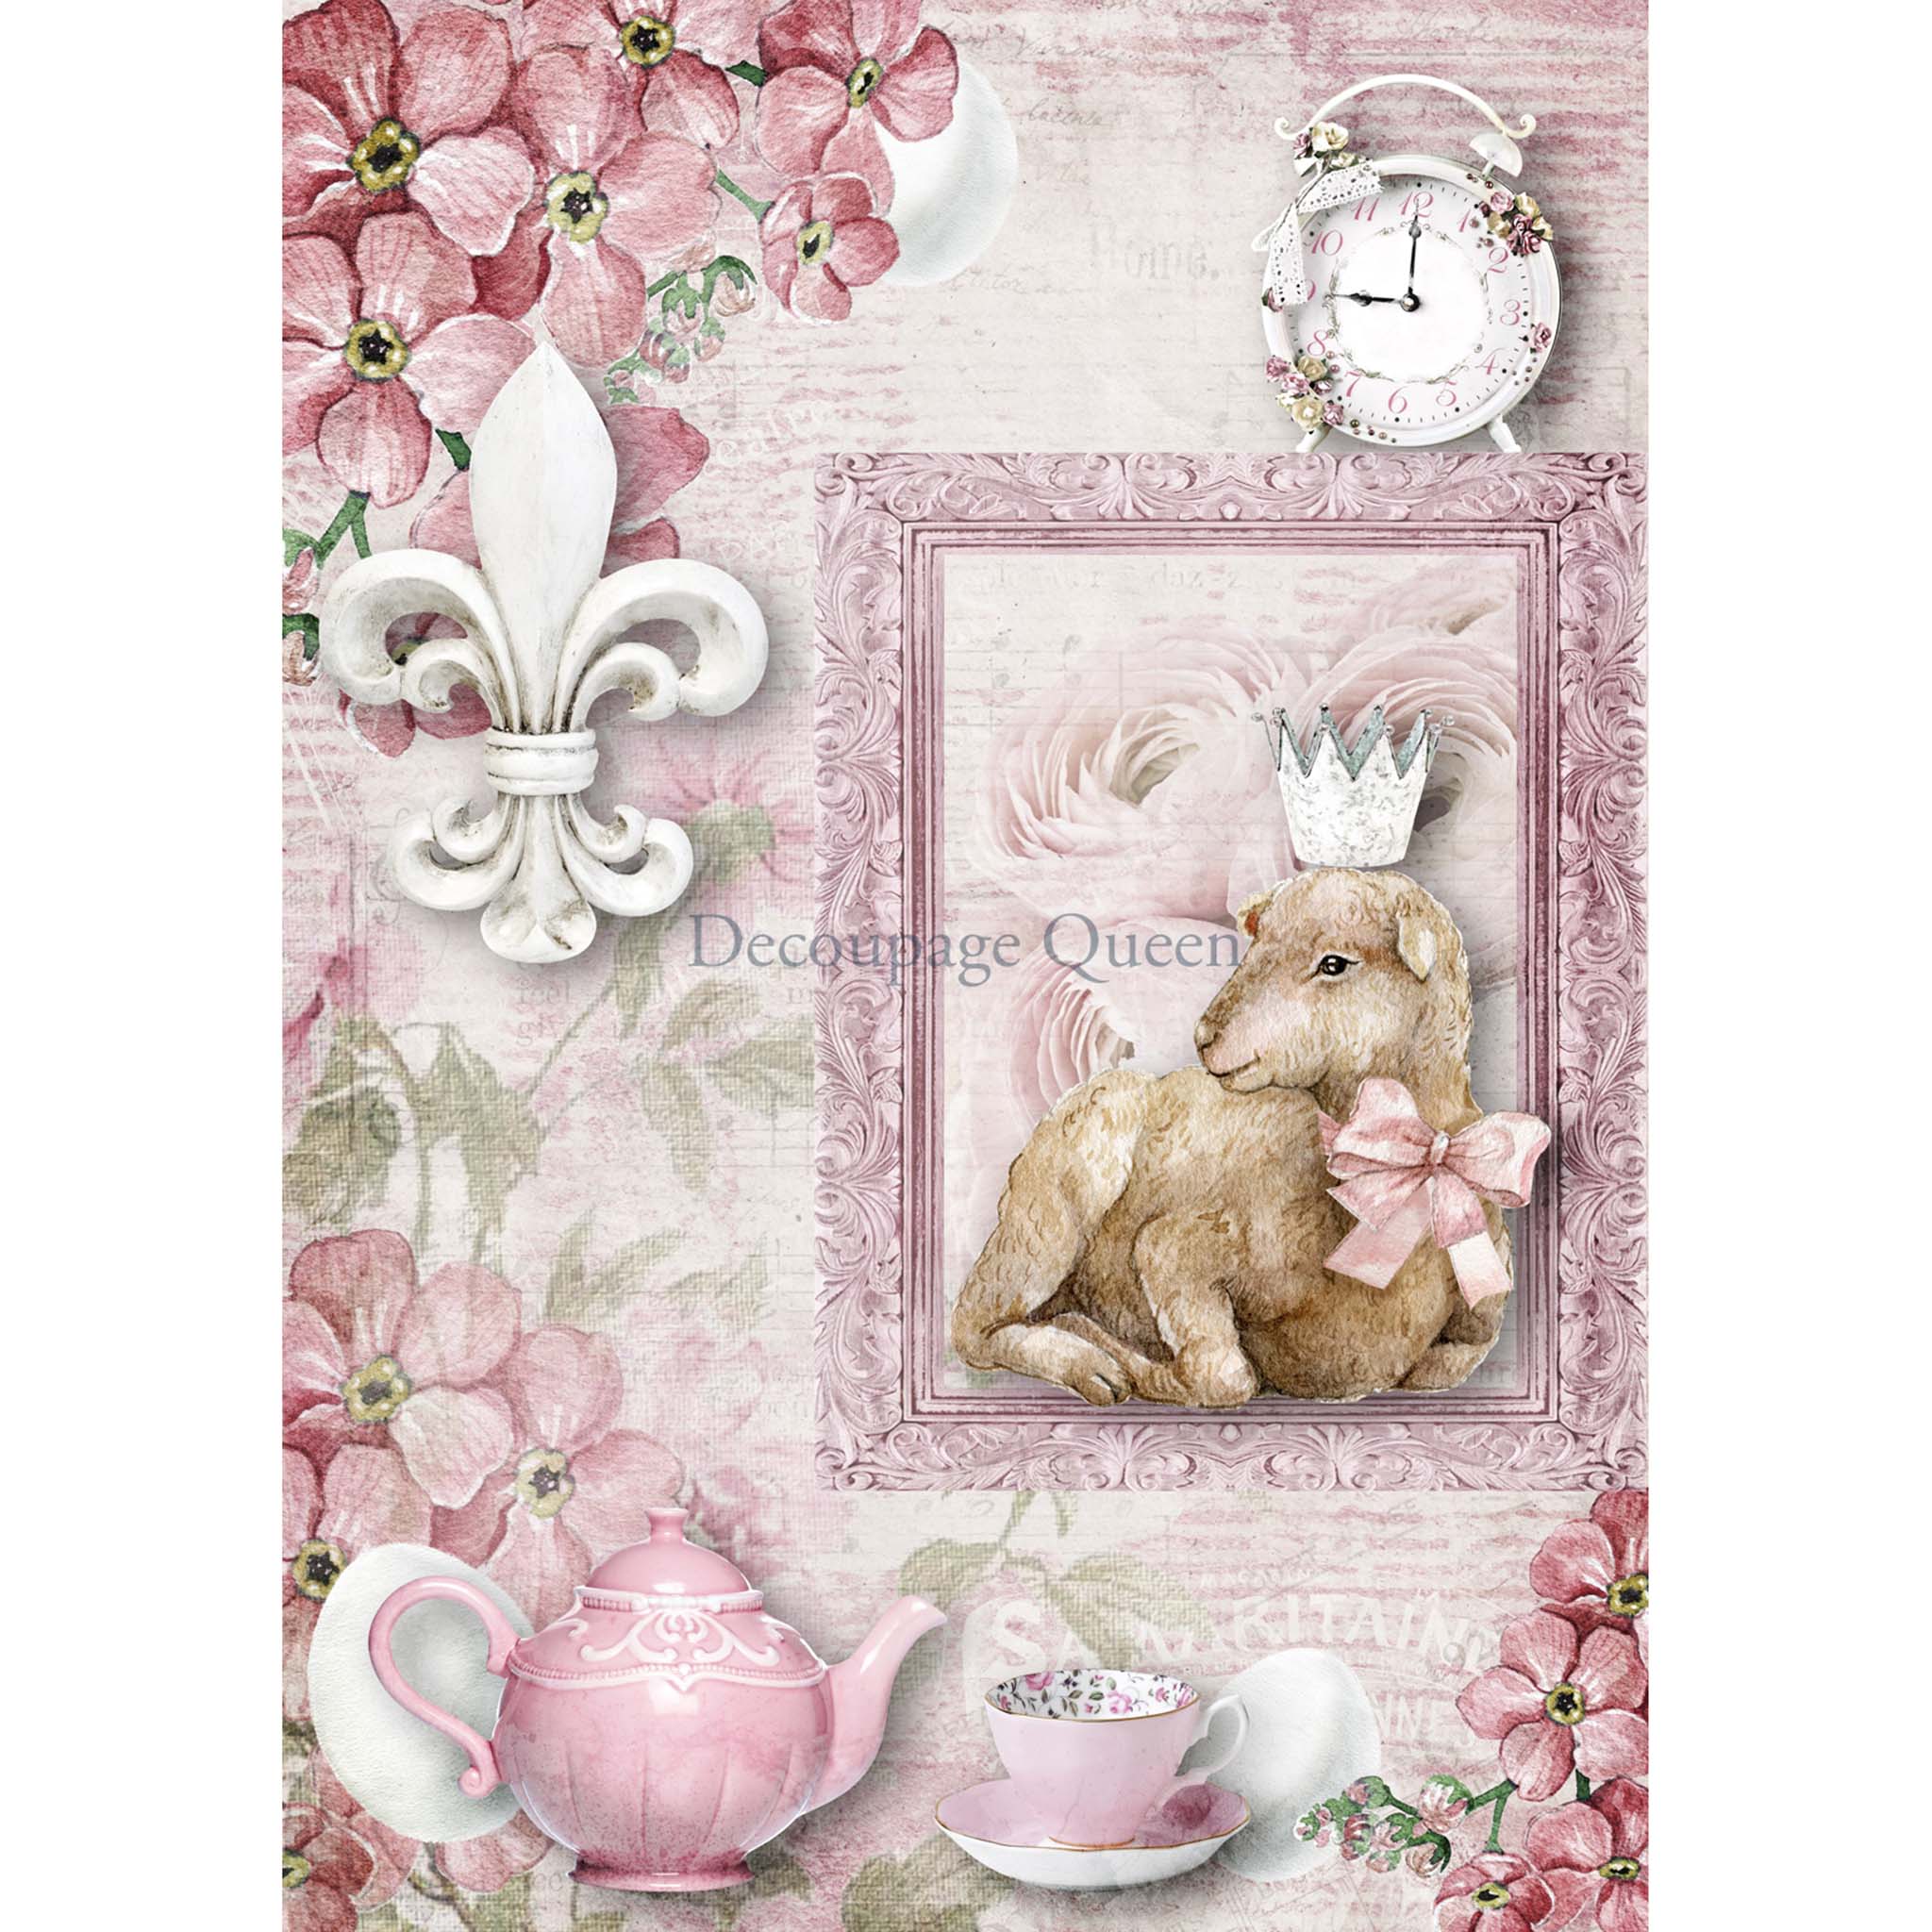 A4 rice paper design that features a pale pink background and adorable lamb with a crown and features fleur de lis, a clock, and a tea set with pink flowers. White borders are on the sides.